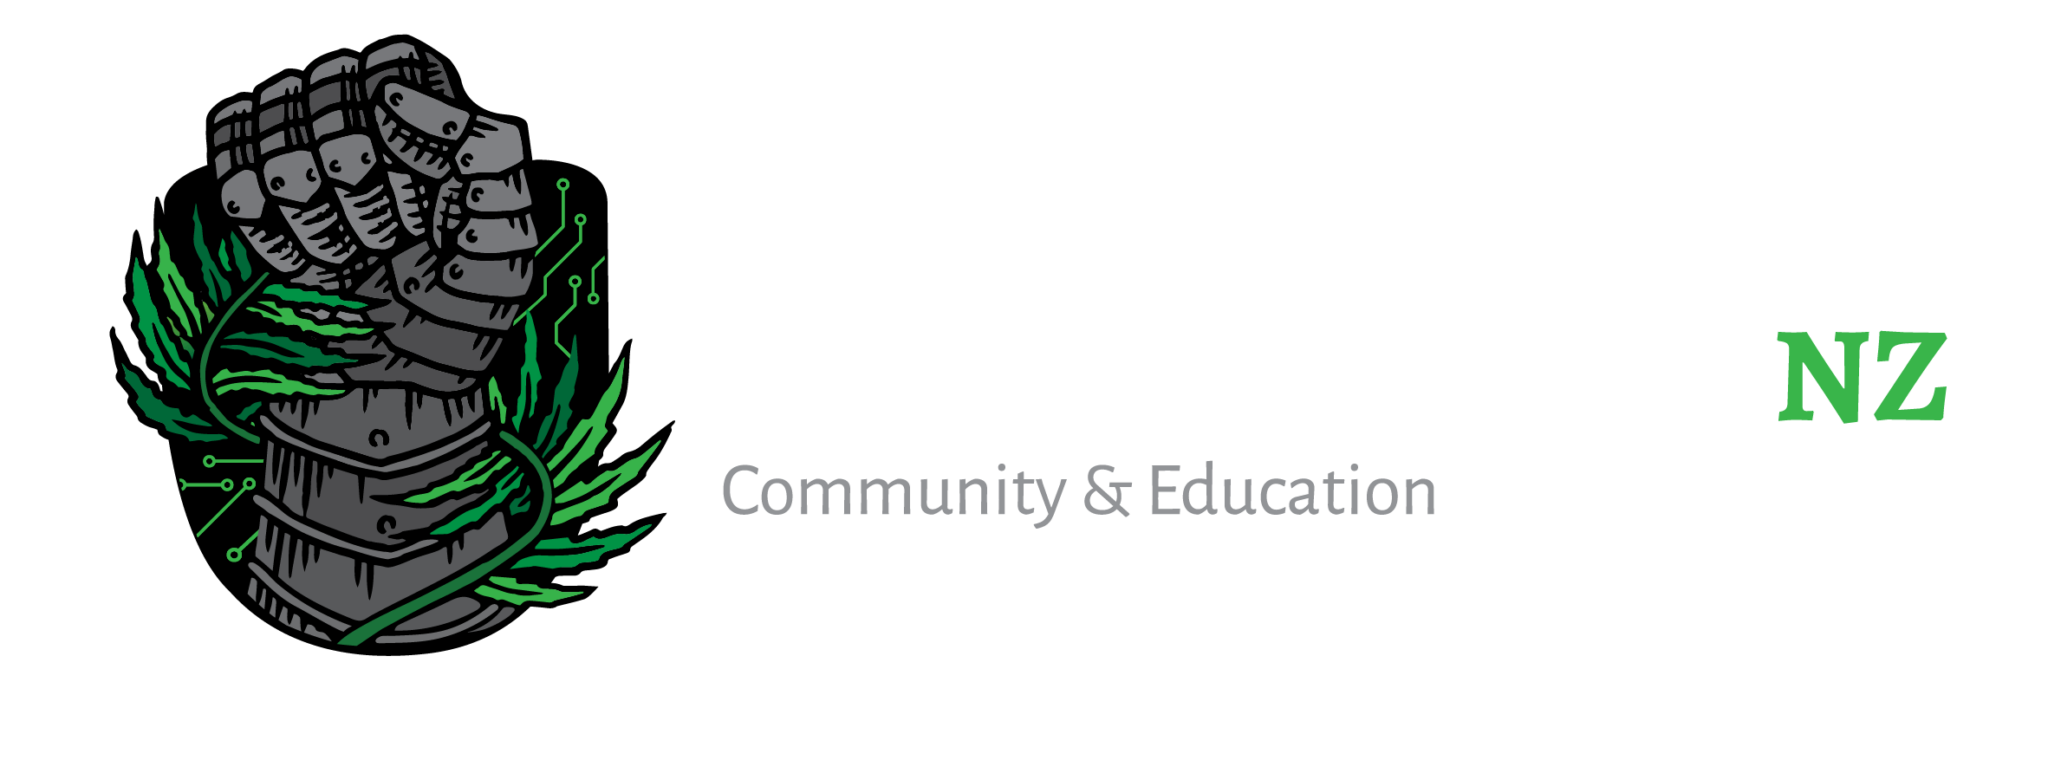 A logo for Cryptocurrency.org.nz of a metal fist with a plant growing around it and a digital background. It reads "Cryptocurrency NZ, Community & Education, established 2020"